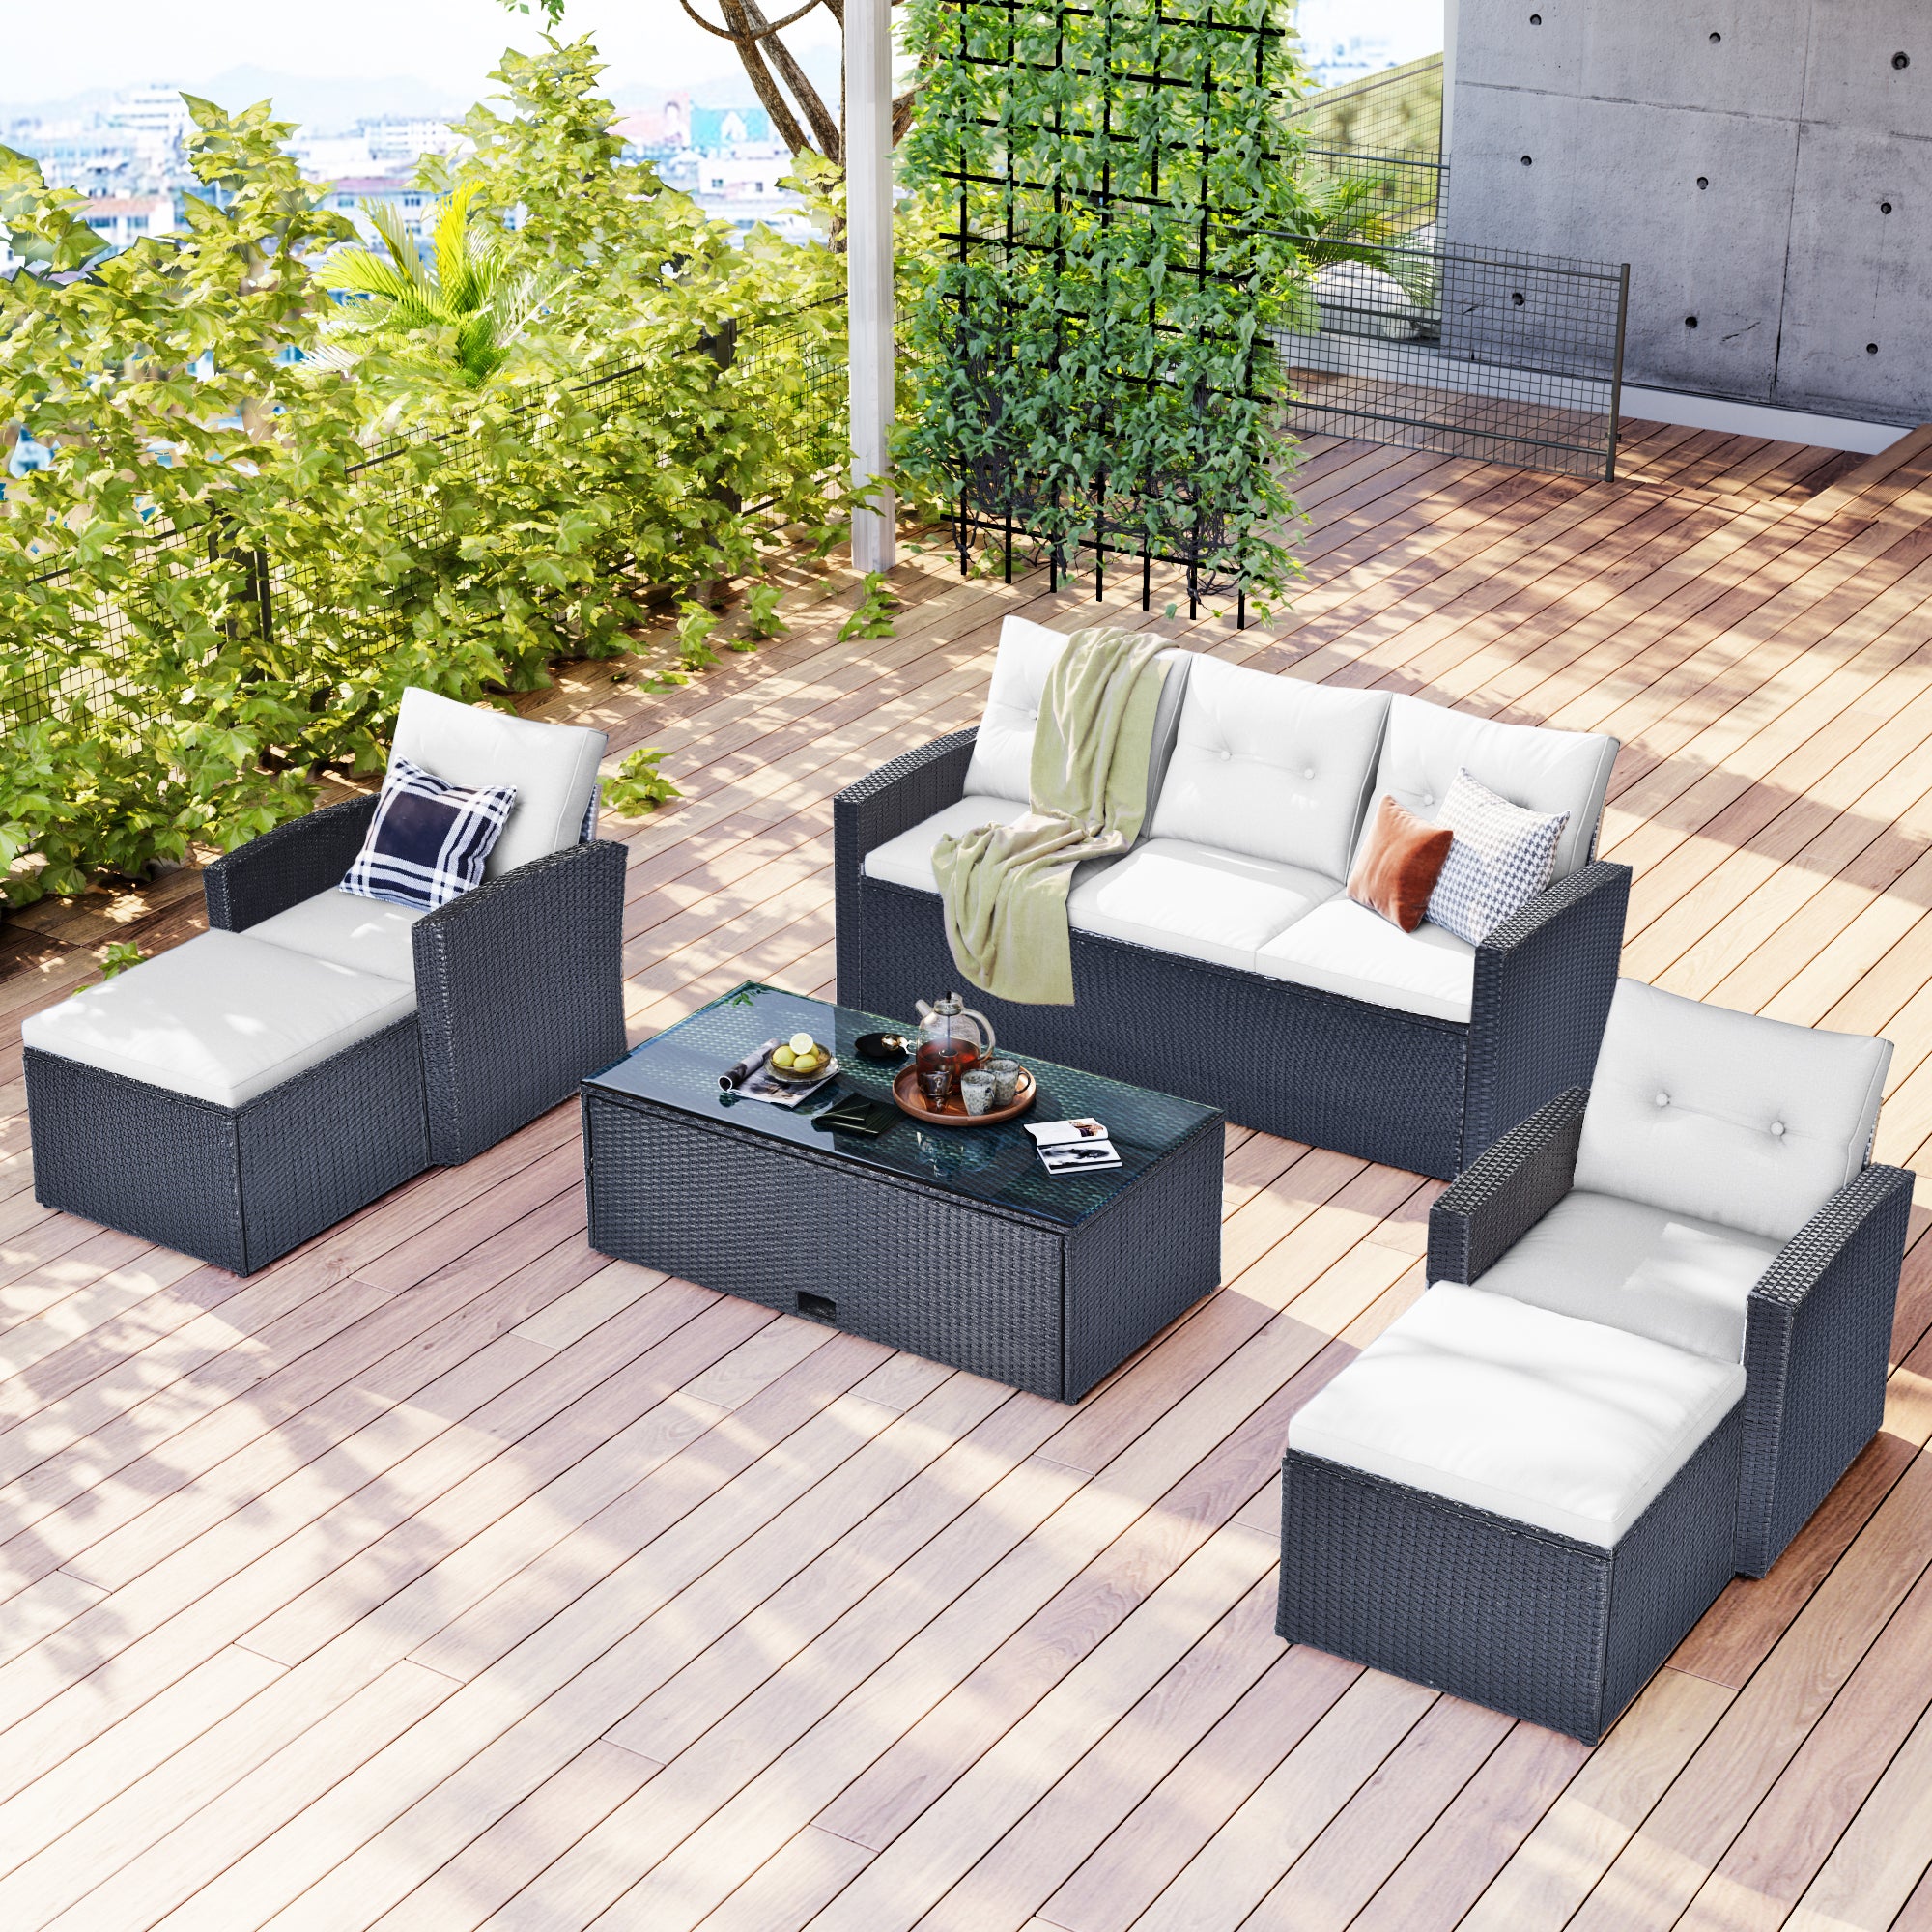 6 Piece Outdoor Sectional Sofa Set with Coffee table, Ottomans, Cushions, Black Wicker, White Cushions